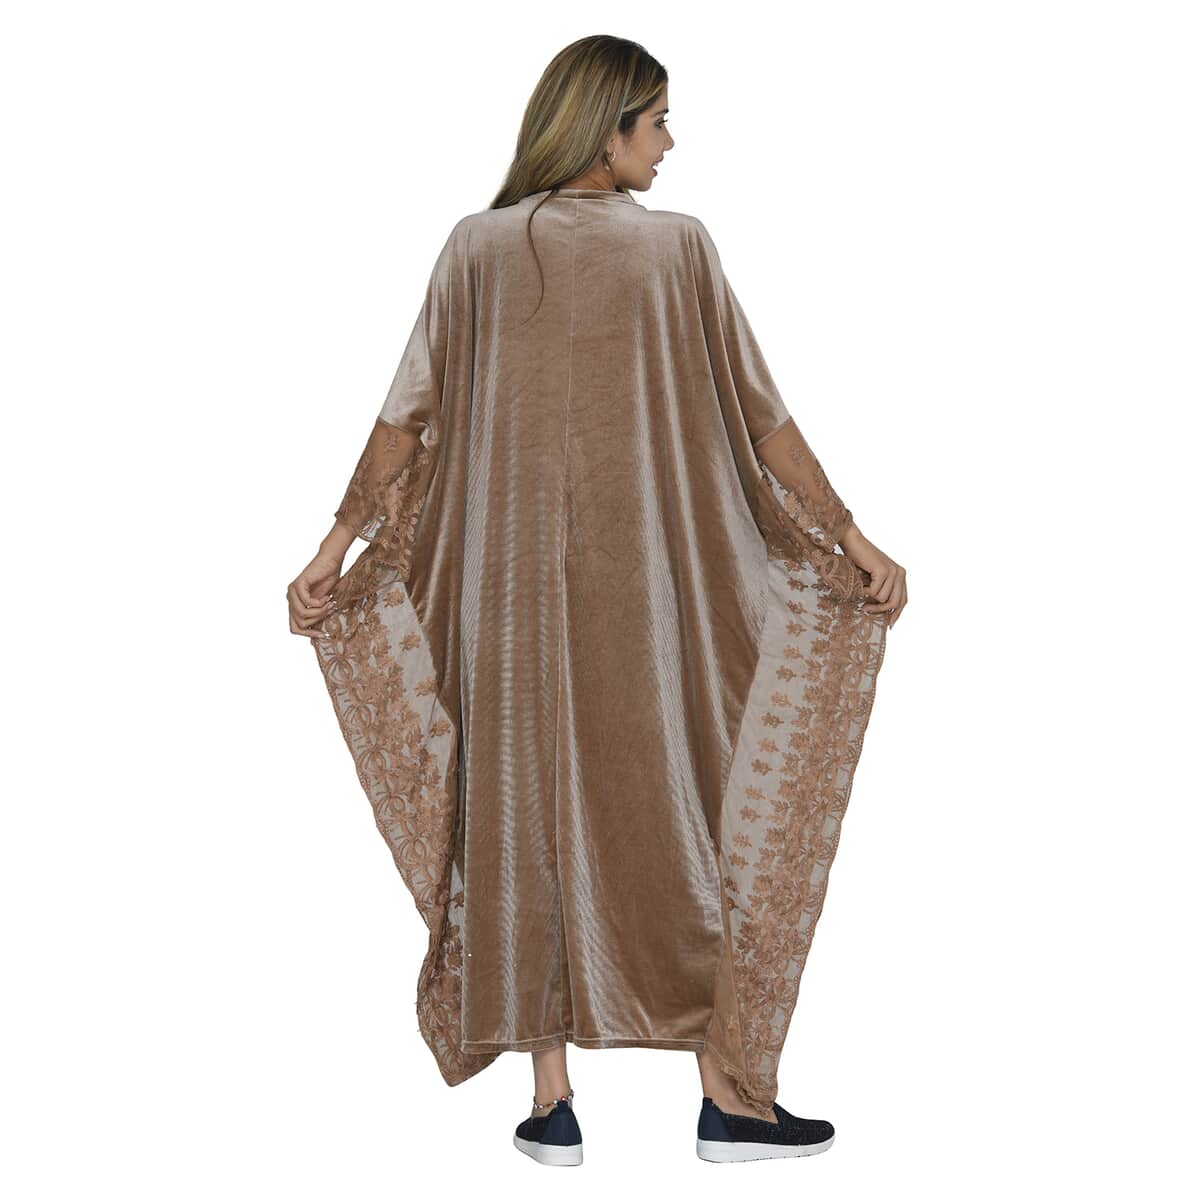 Tamsy Black Label - Lux Stretch Velvet Kaftan with Lace in Caramel - One Size Fits Most image number 1